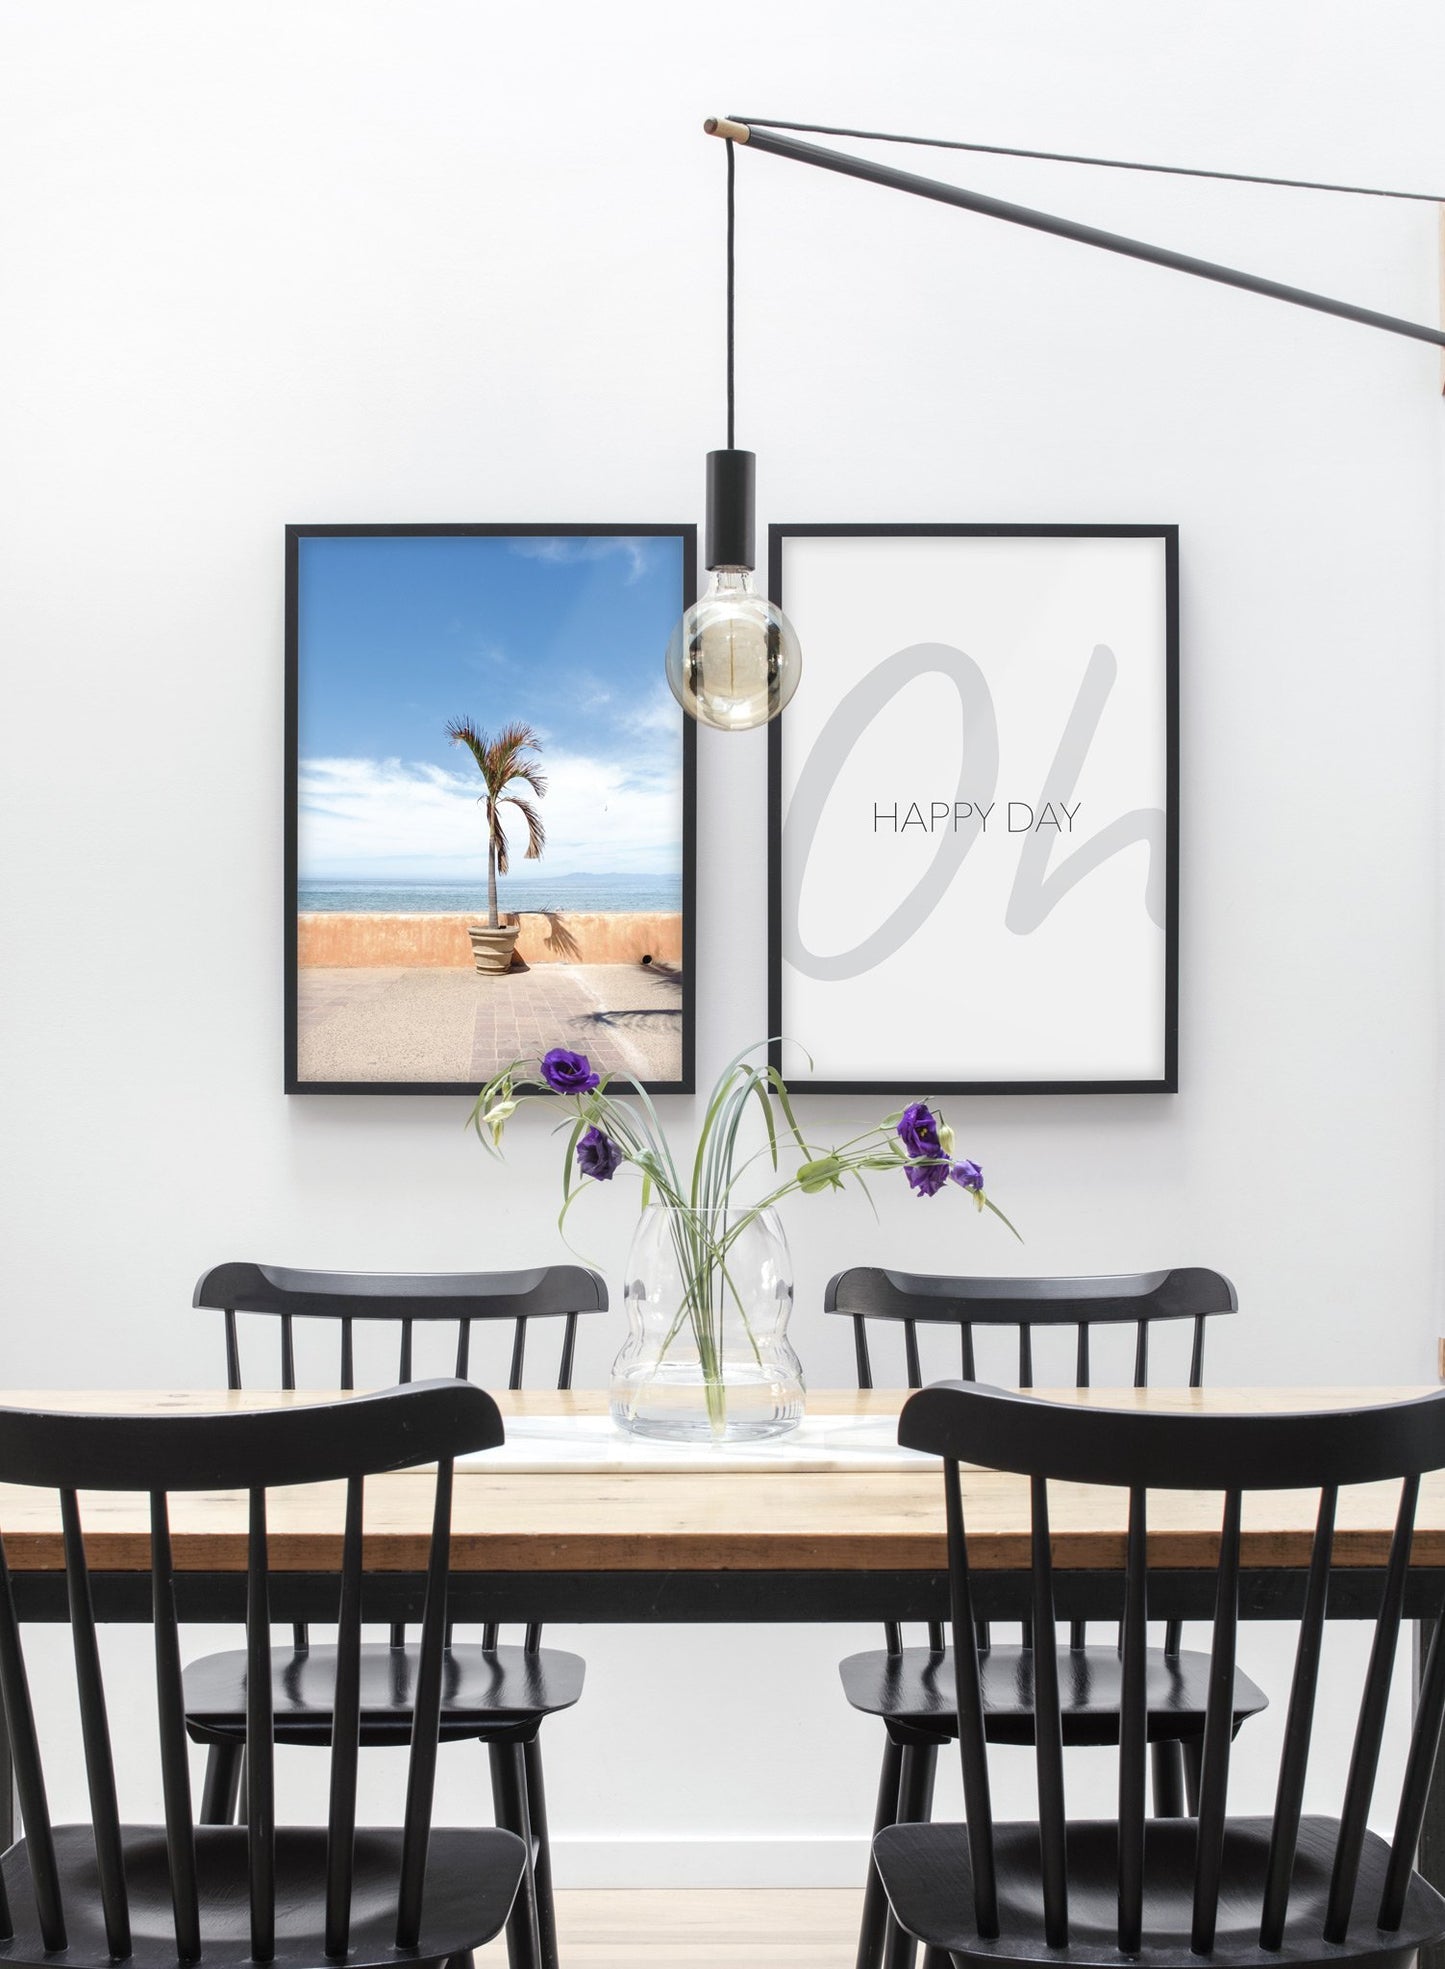 At the Beach modern minimalist photography poster by Opposite Wall - Duo - Dining room